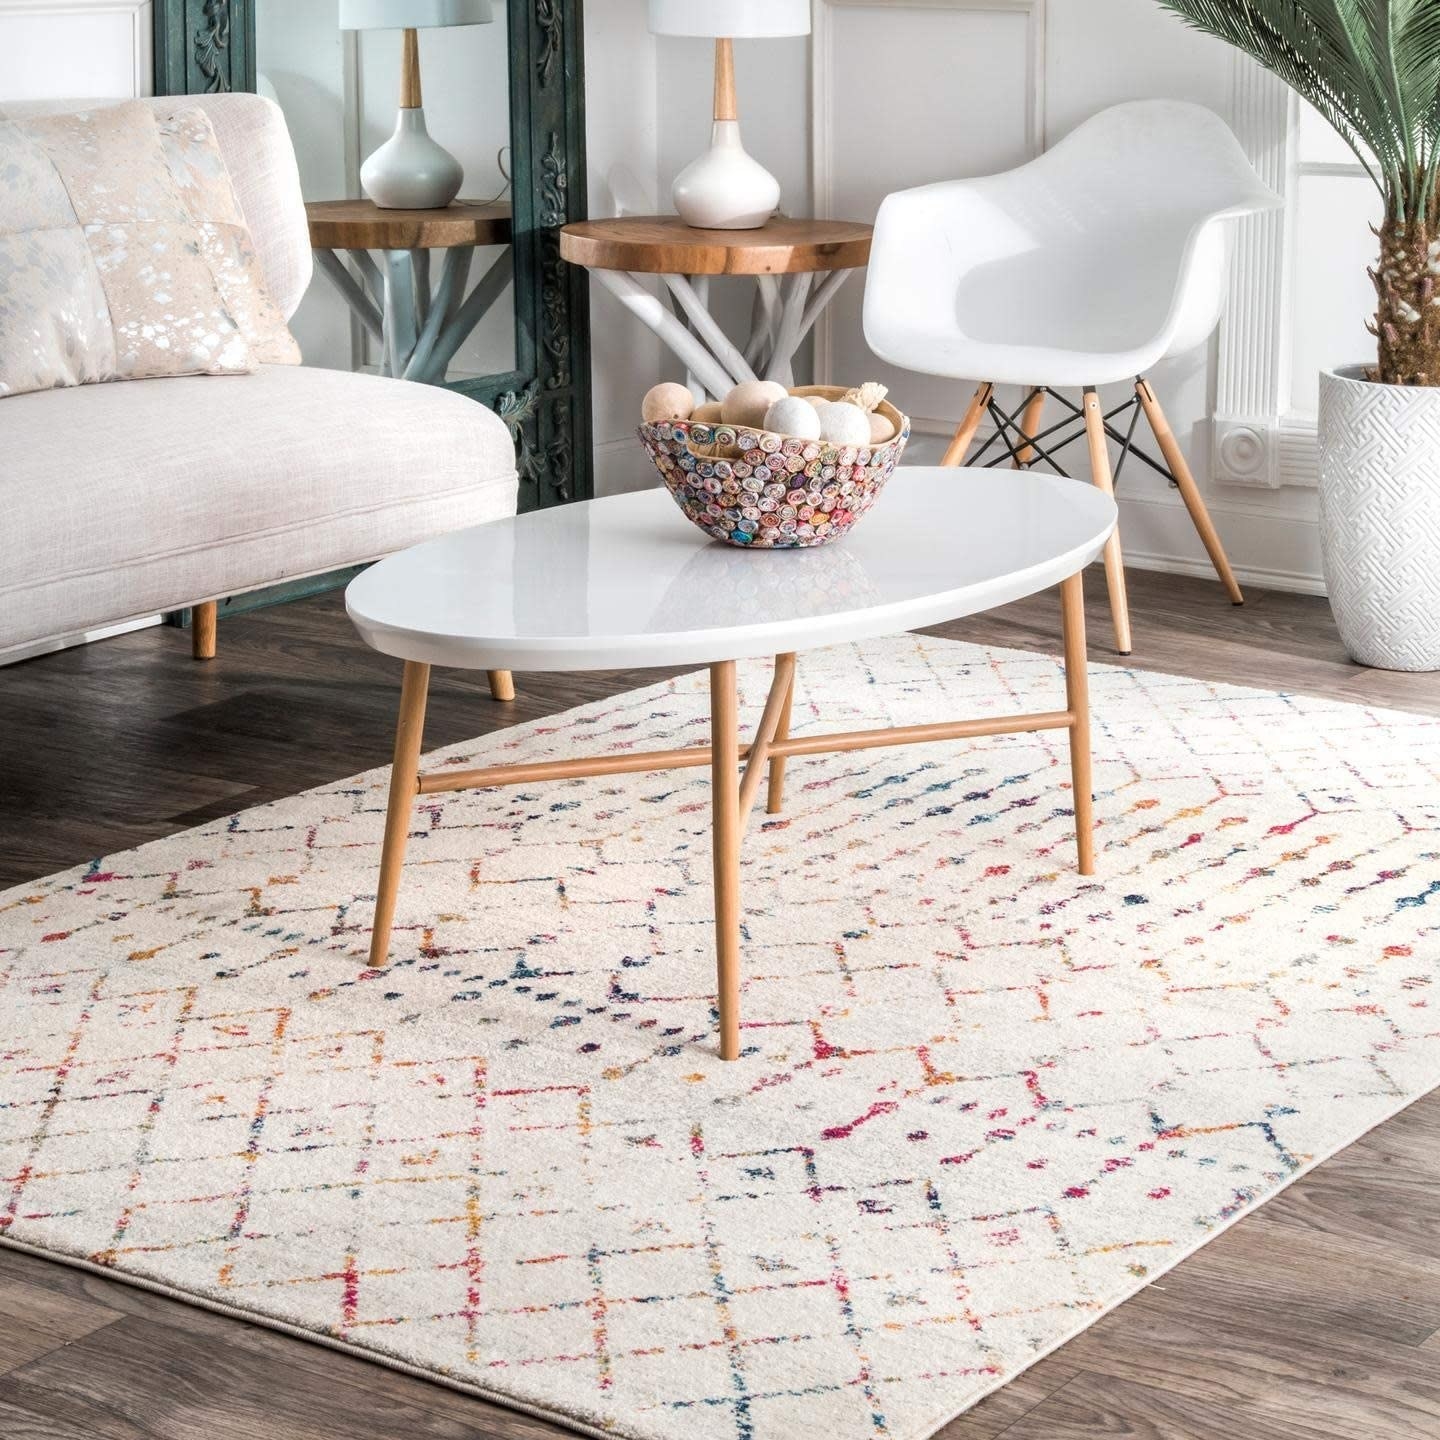 the cream rug with a multi-colored geometric print